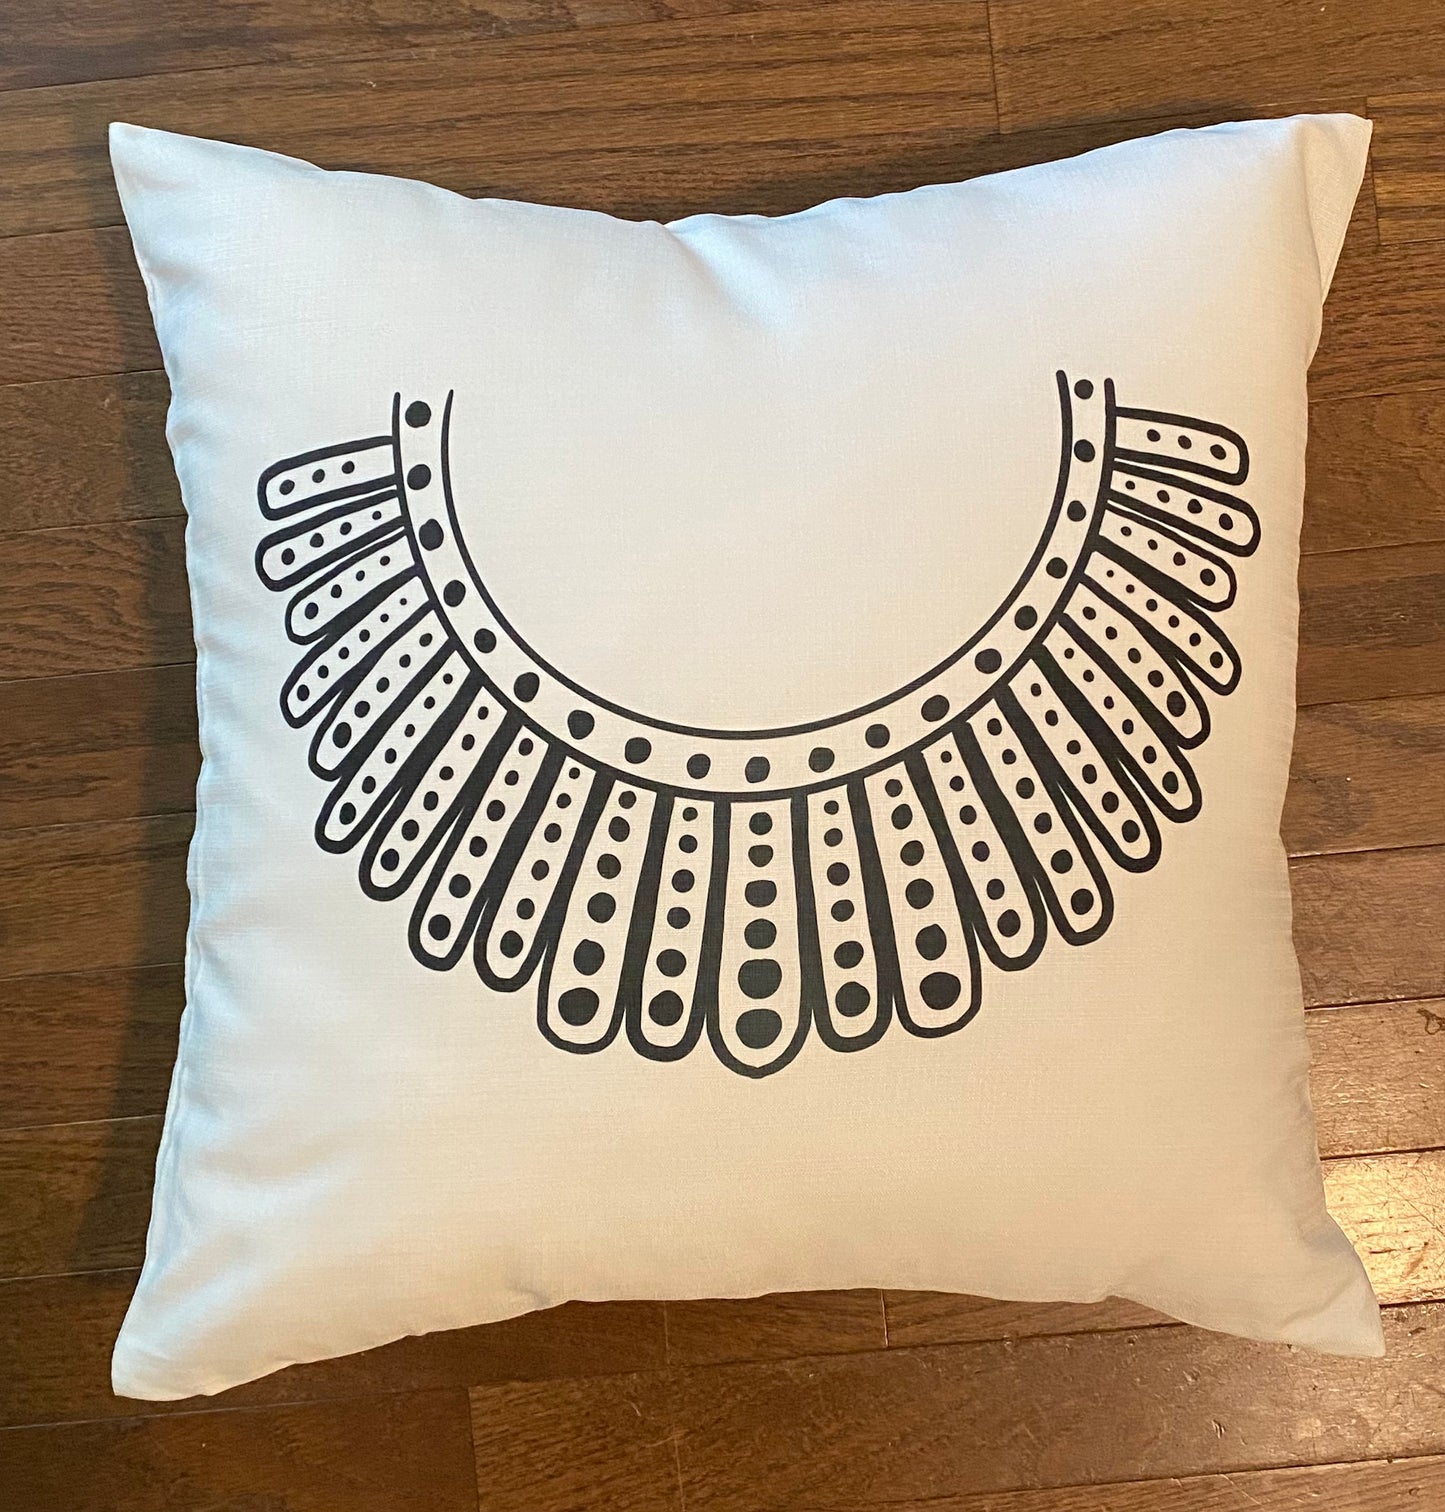 Dissent Collar Throw Pillow Covers - various quantities